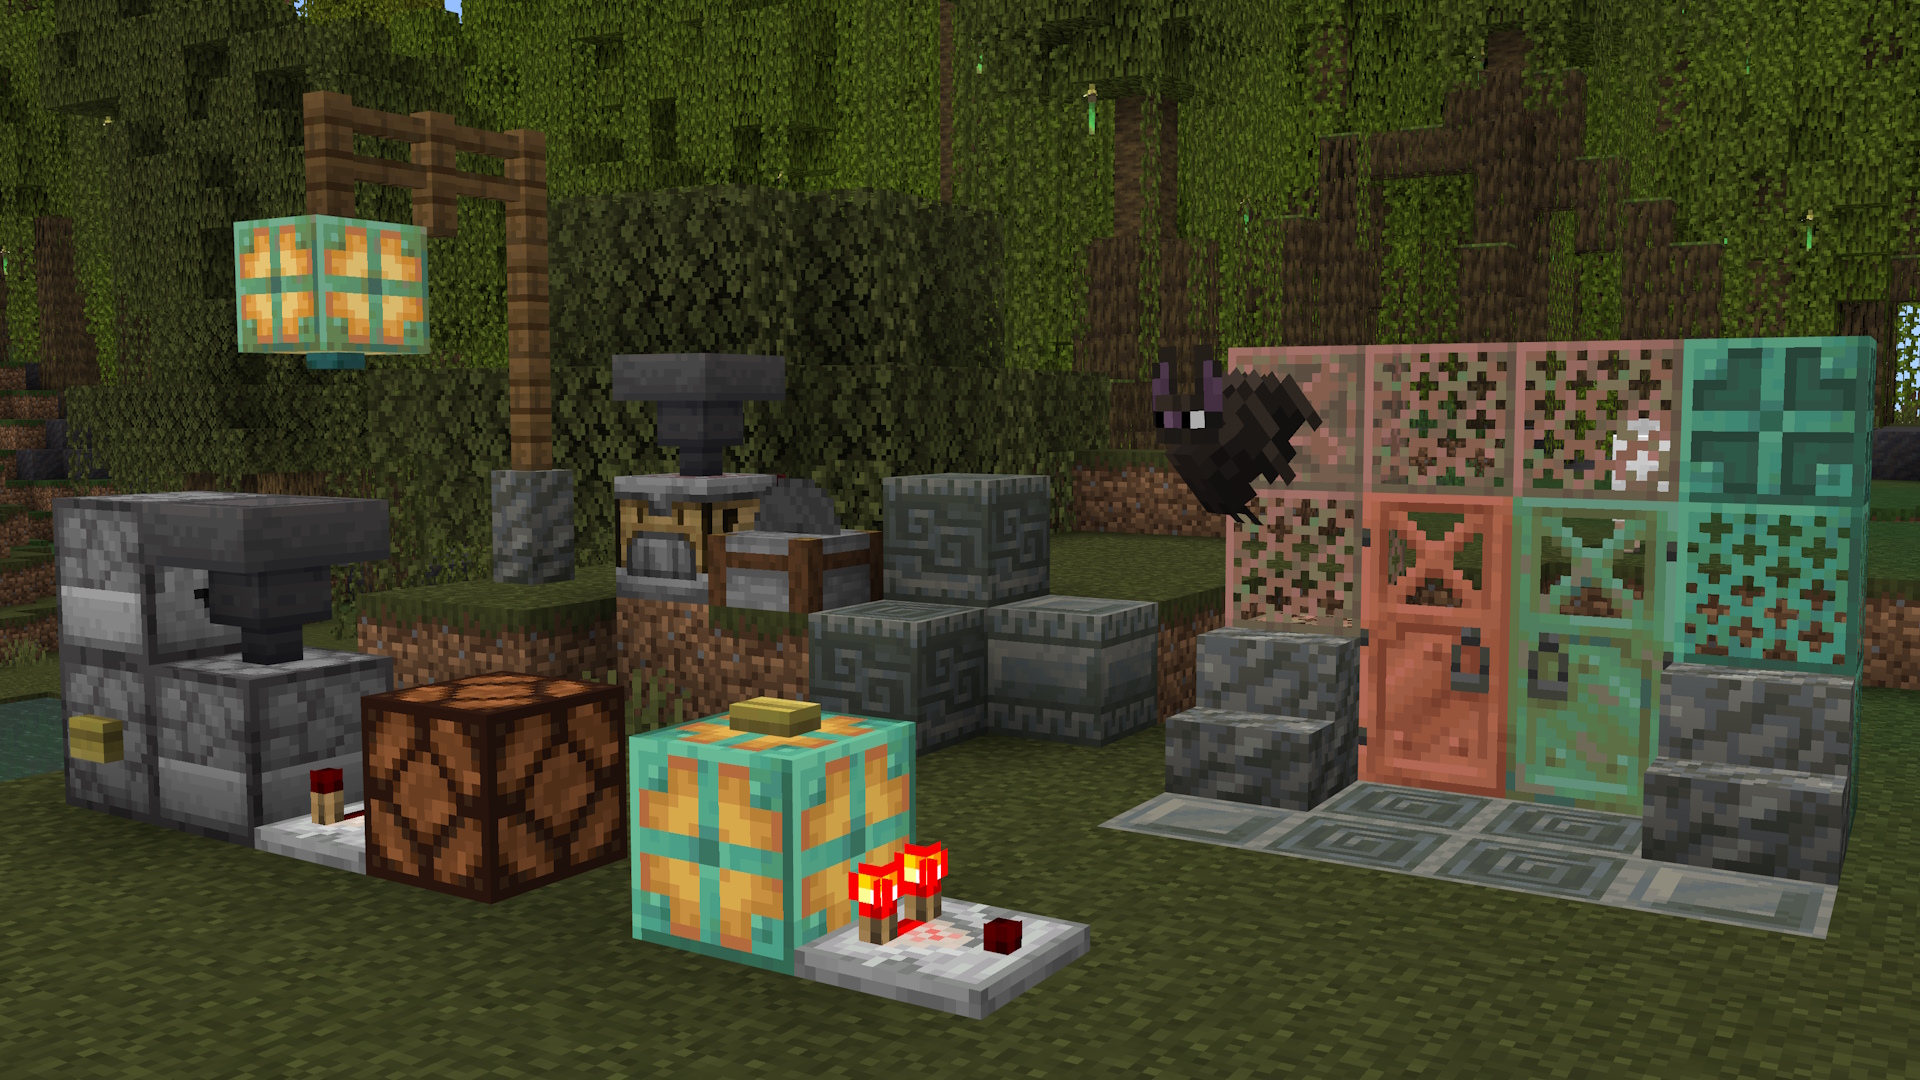 The new copper and tuff blocks in the Minecraft Preview. There are some redstone builds in the scene, and a bat in the foreground sporting a new look